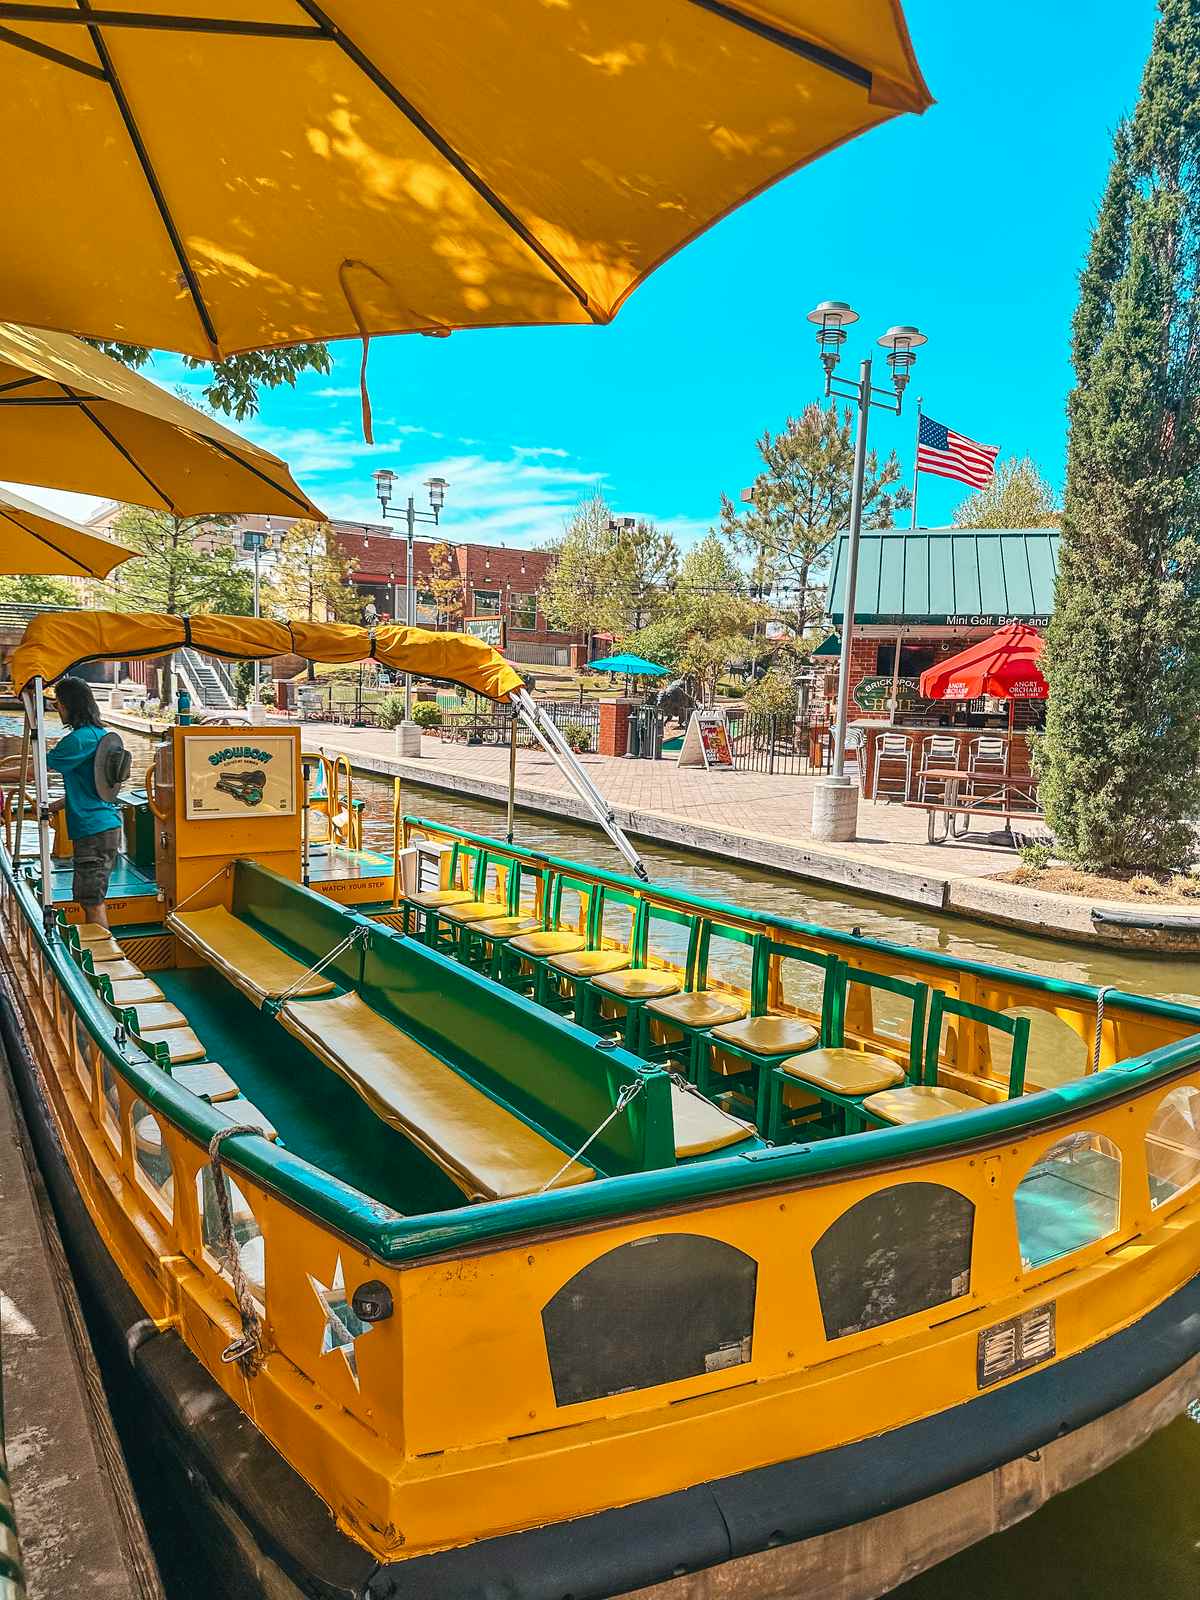 Bricktown Water Taxi in Oklahoma City